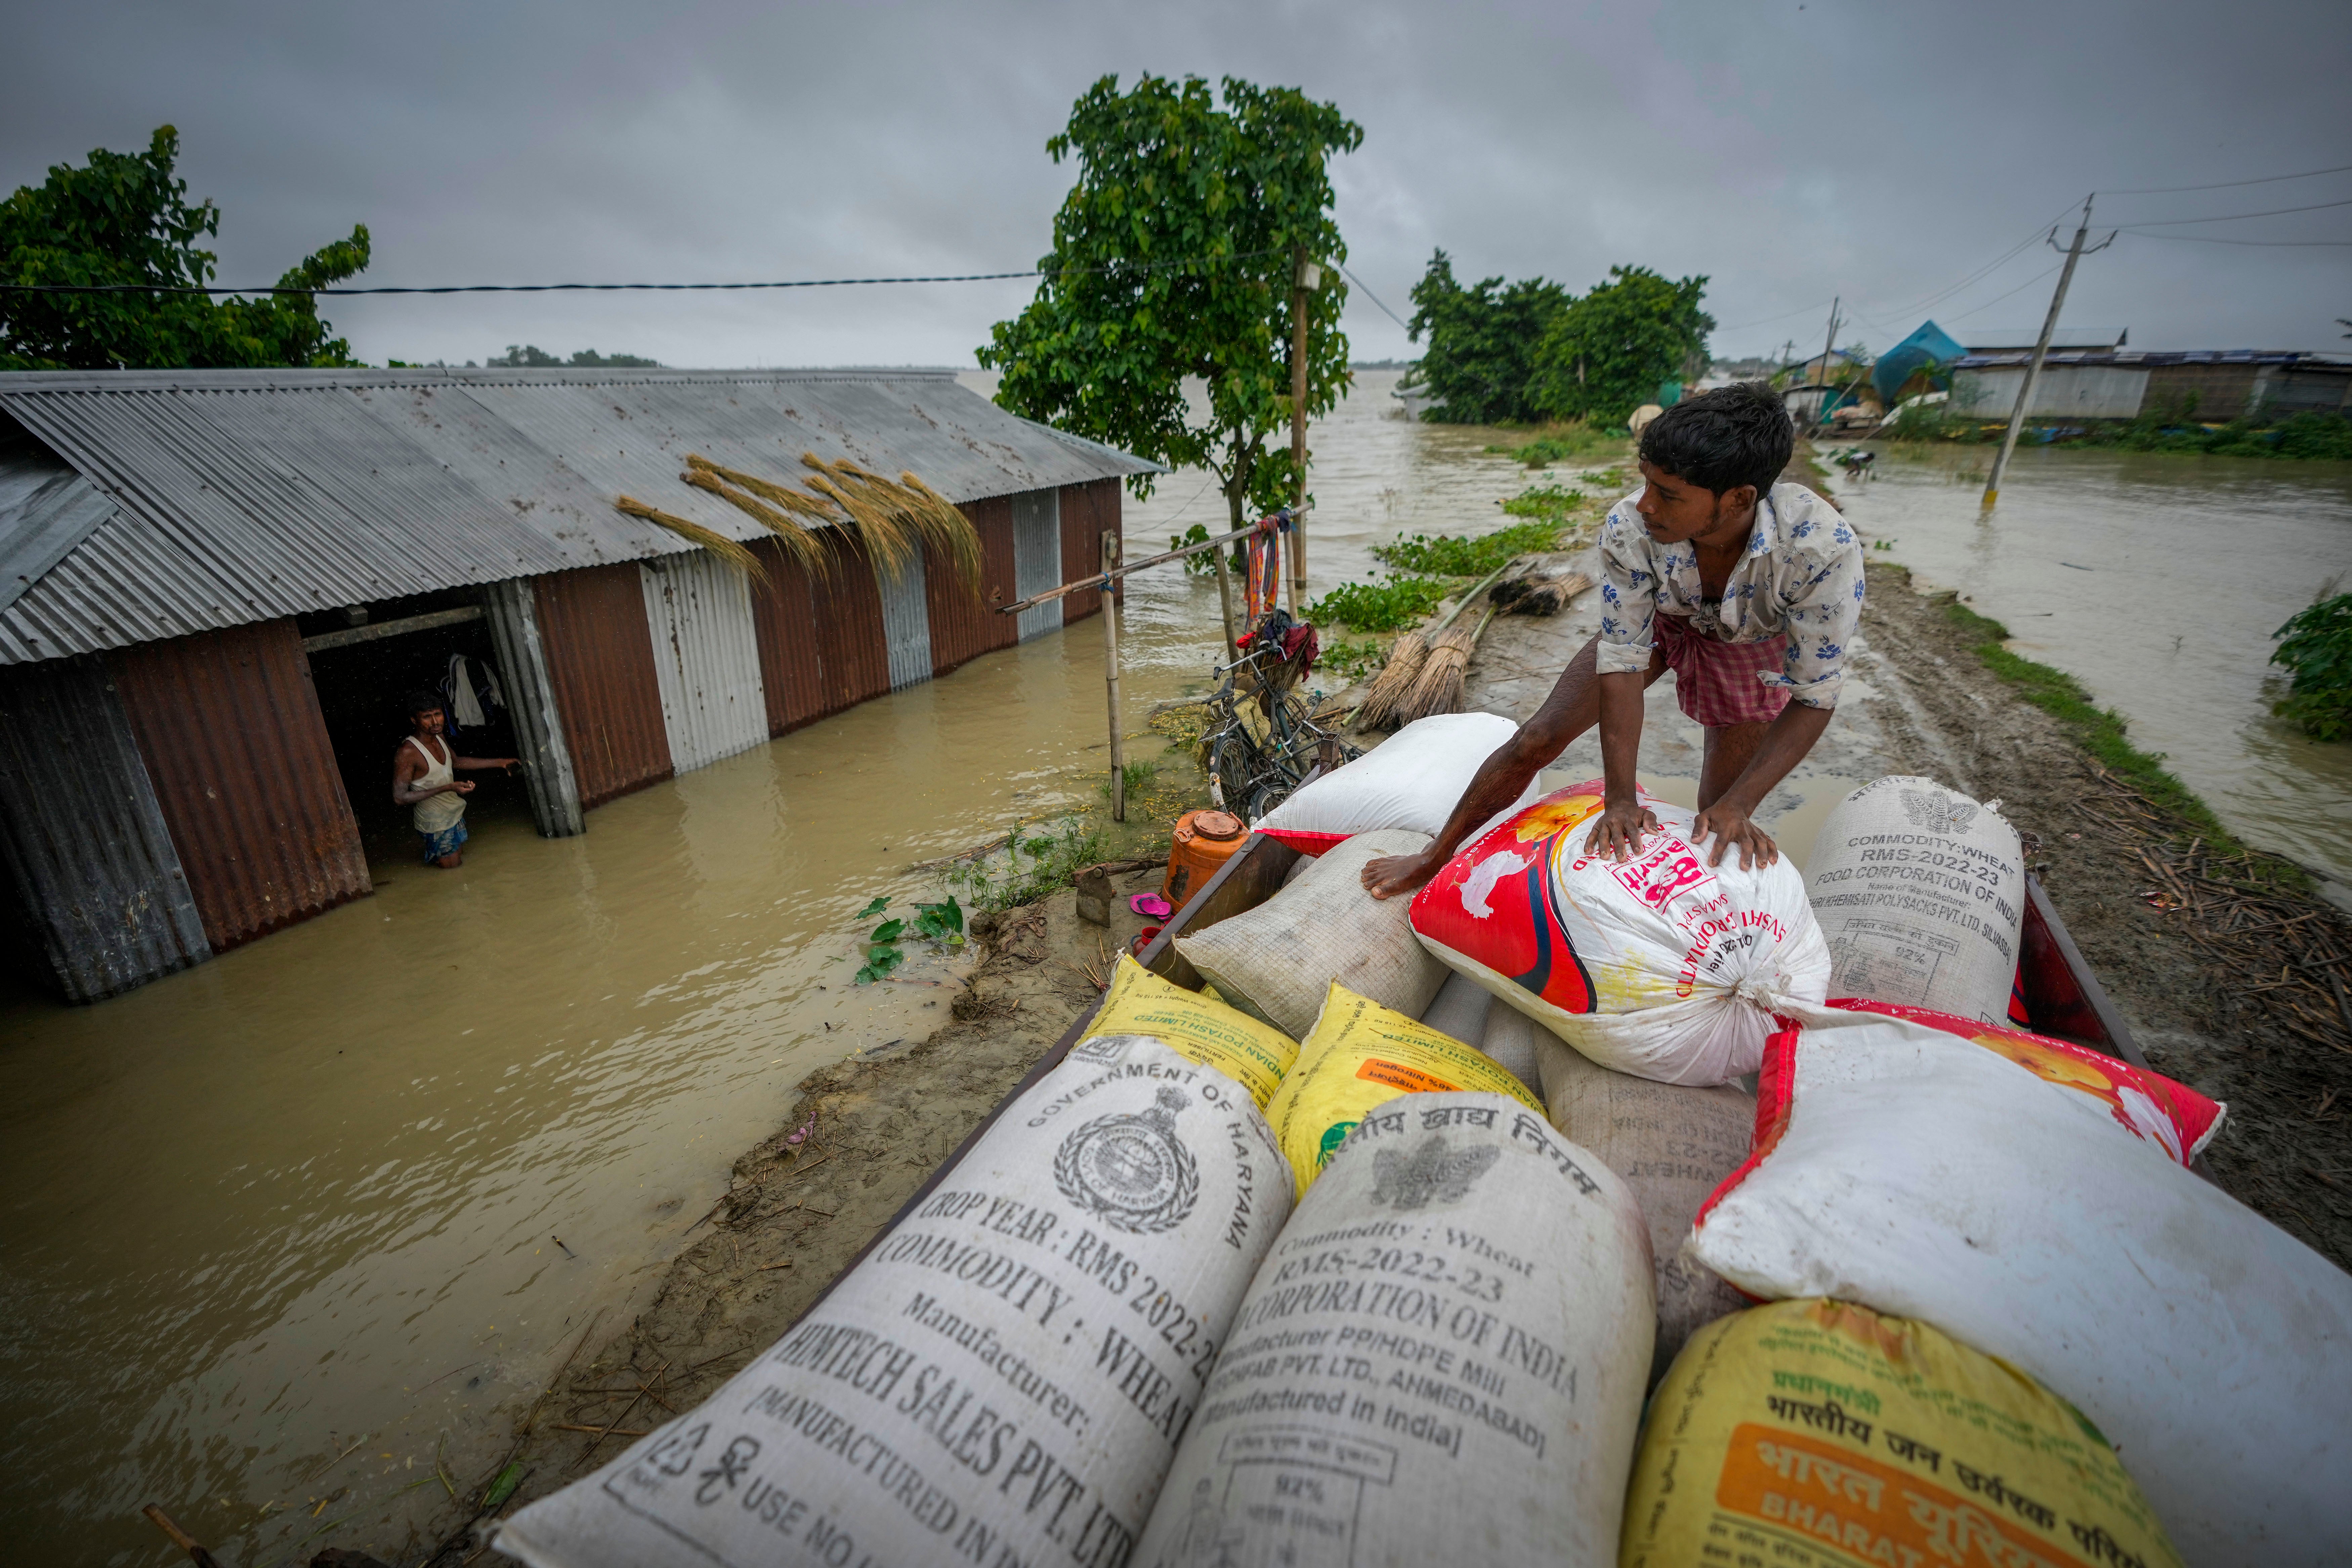 A flood affected person loads sacks of rice on a vehicle to transport to a safer place from his submerged house in Sildubi village in Morigaon, Assam